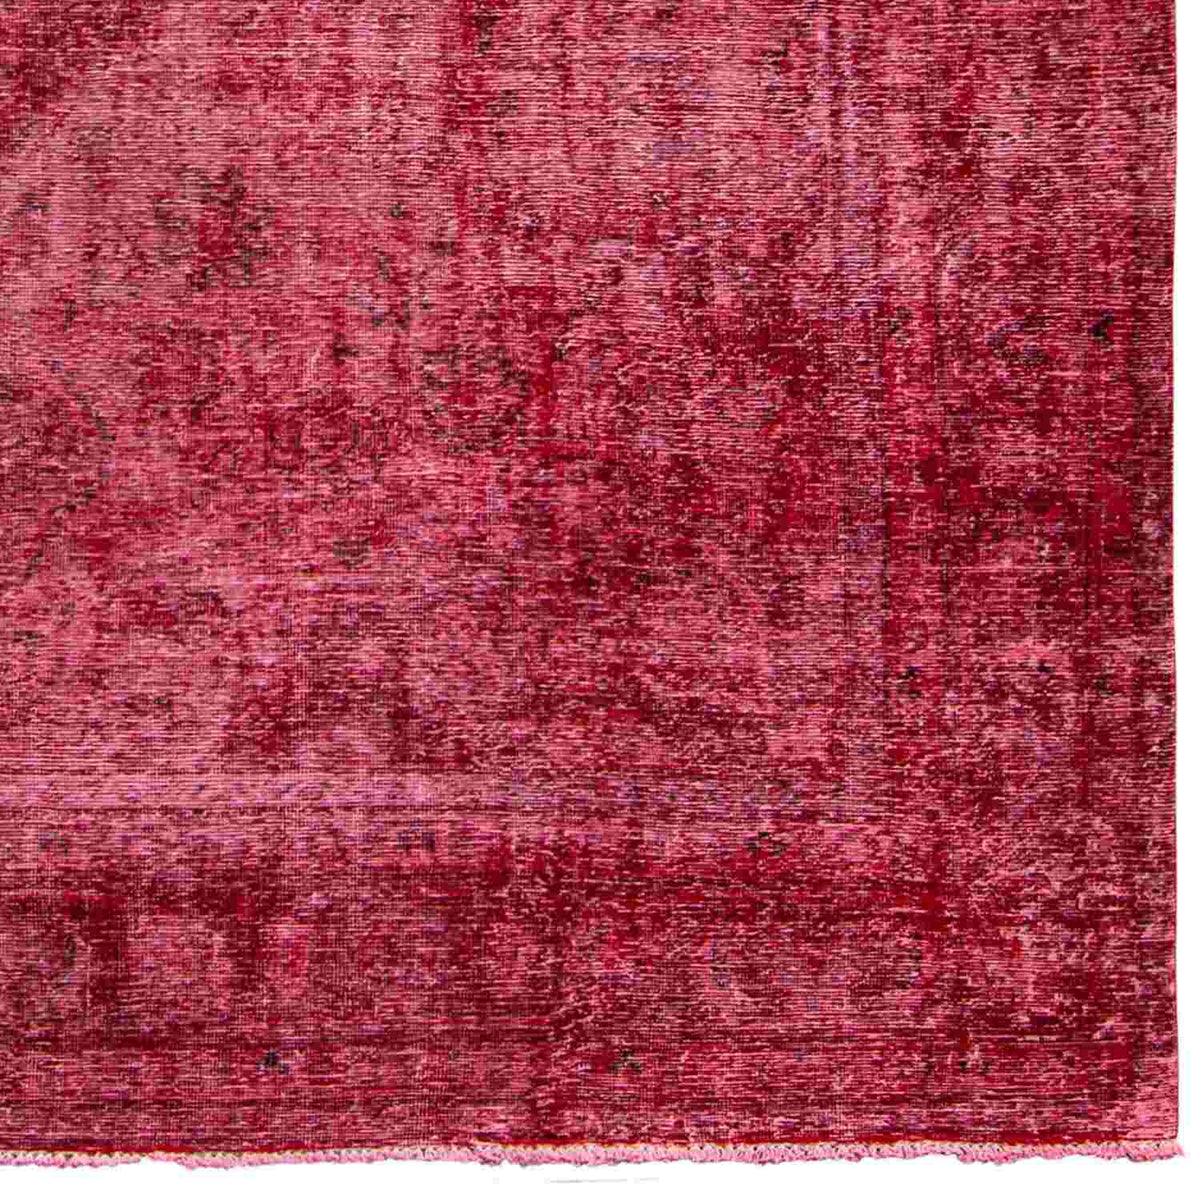 Large Hand-knotted Woollen Persian Vintage Rug 296cm x 383cm